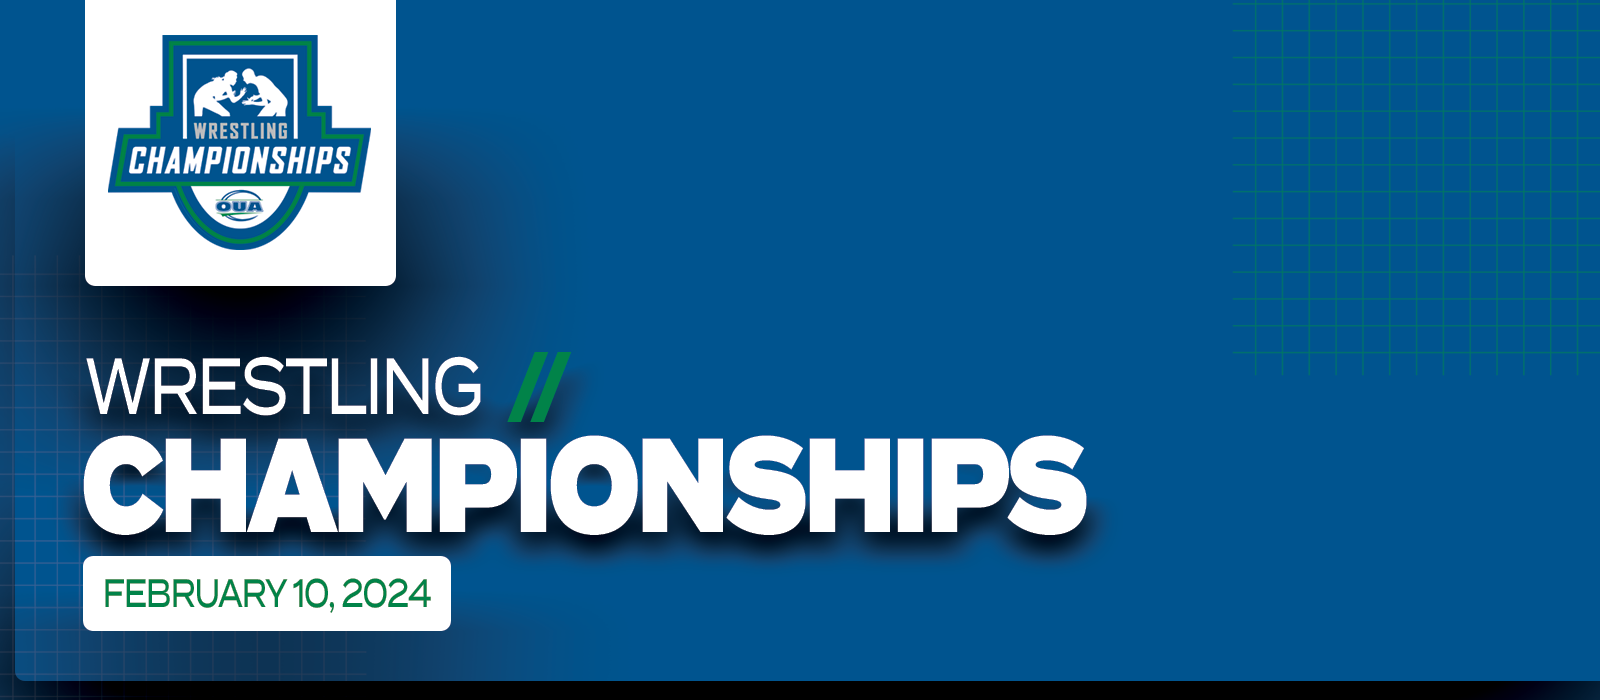 Predominantly blue graphic with large white text on the left side that reads Wrestling Championships, February 10, 2024’ beneath the OUA Wrestling Championships logo